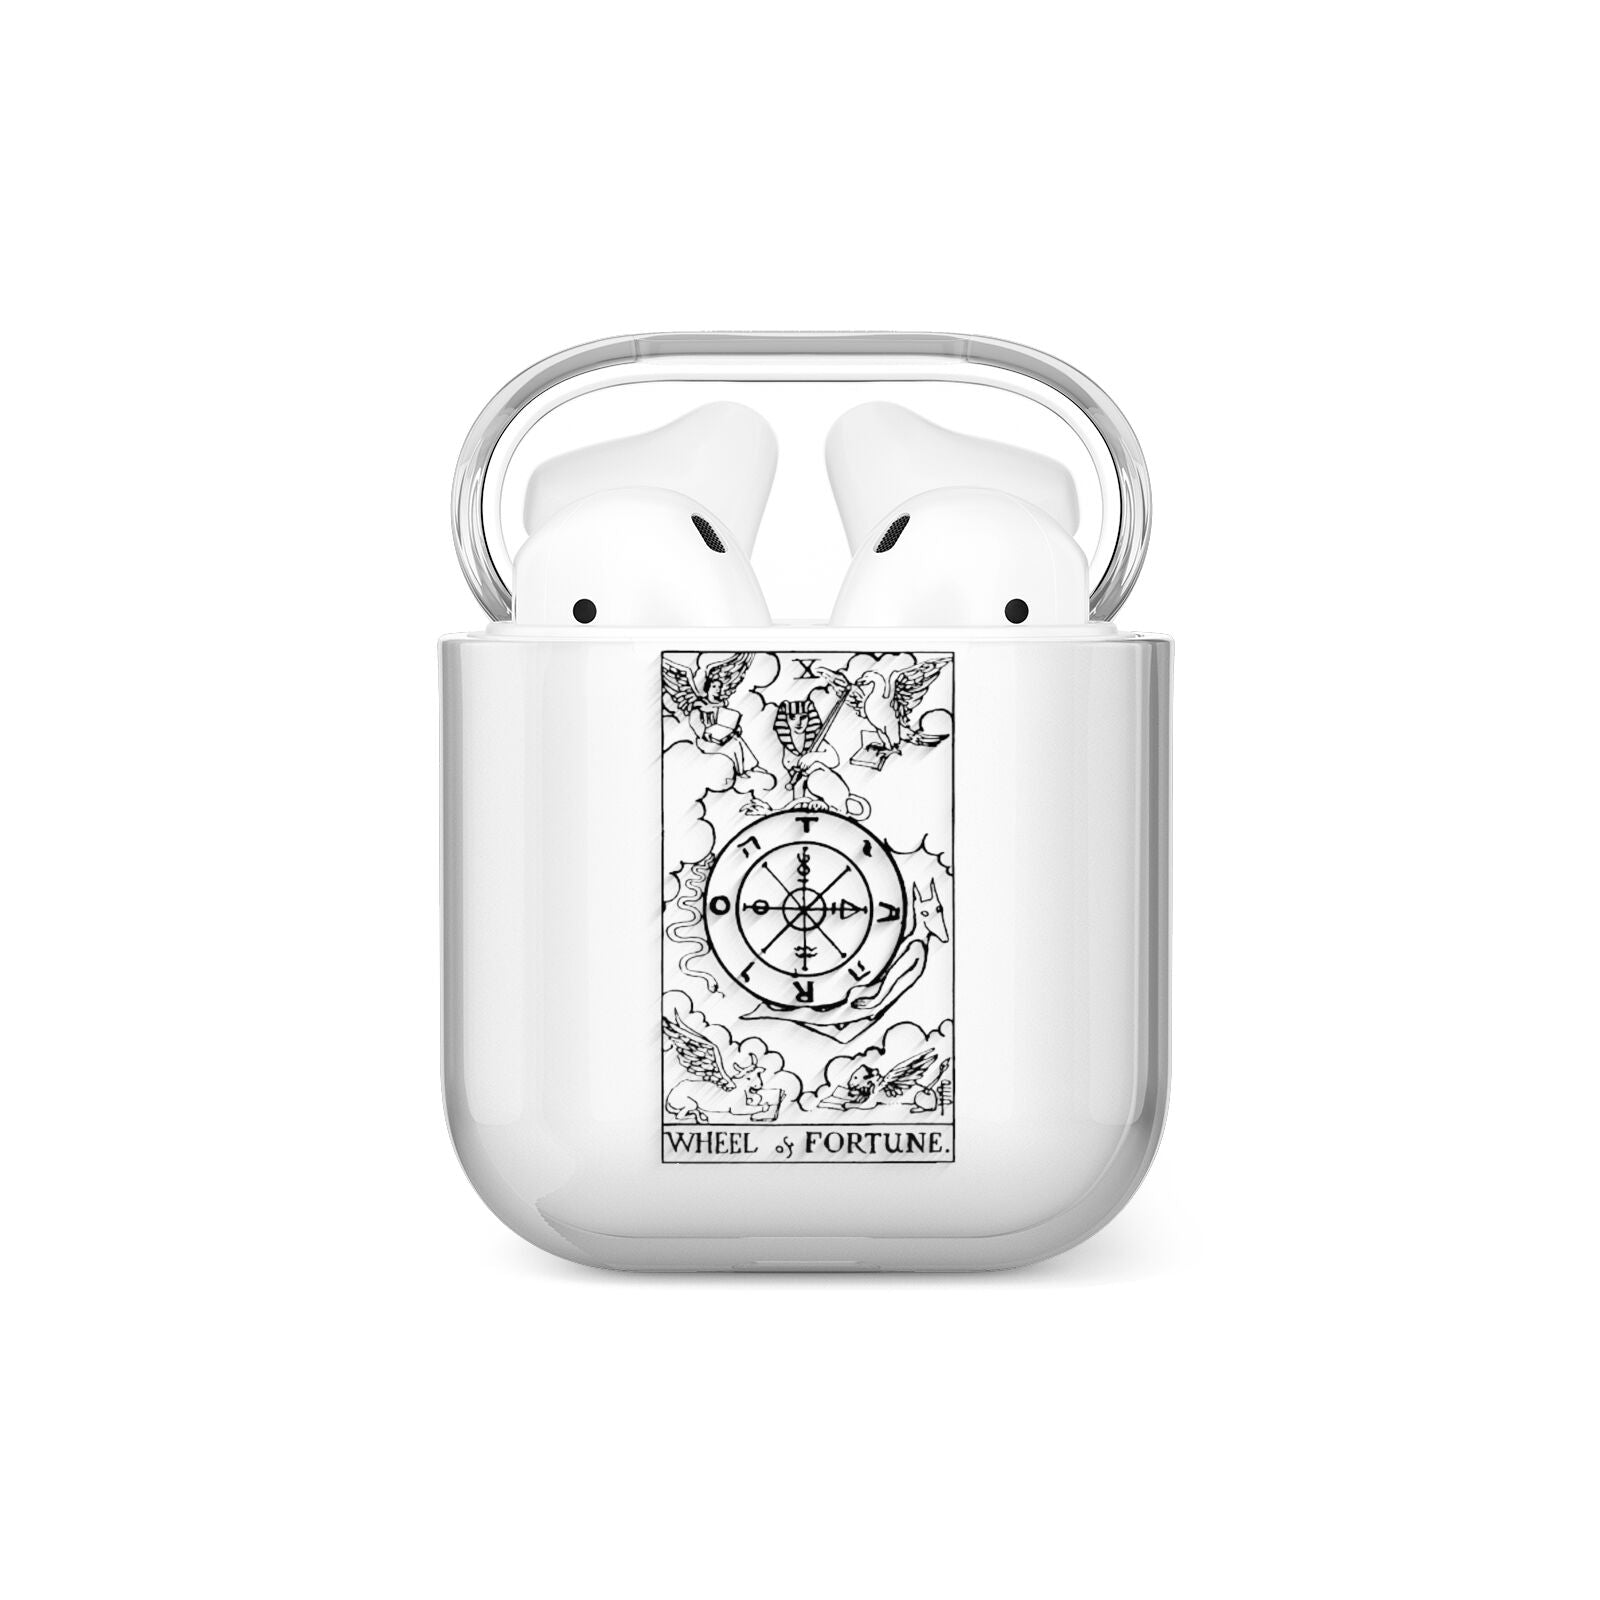 Wheel of Fortune Monochrome Tarot Card AirPods Case